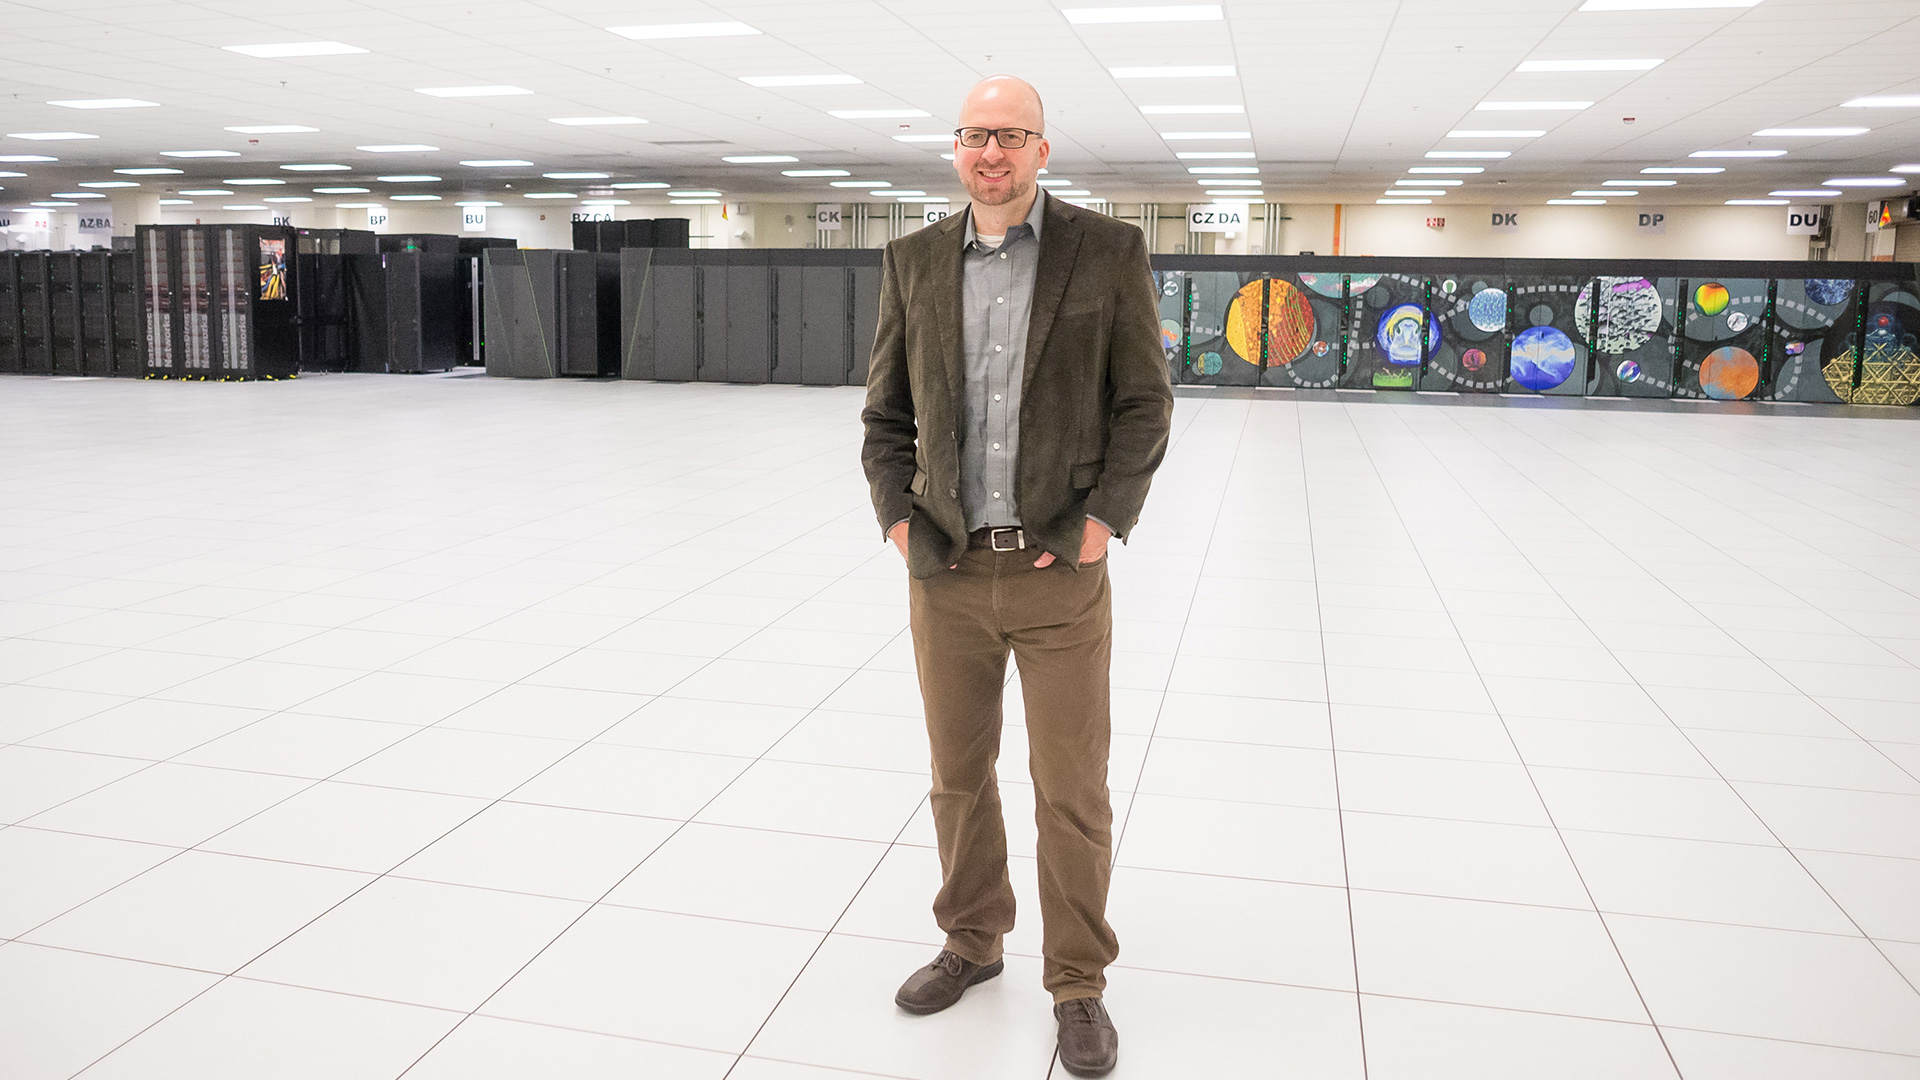 Justin Wozniak of the Swift/T team. Not pictured from the Swift/T team are Jonathan Ozik, Nicholson Collier, Ian Foster and Michael Wilde. (Image by Argonne National Laboratory.)